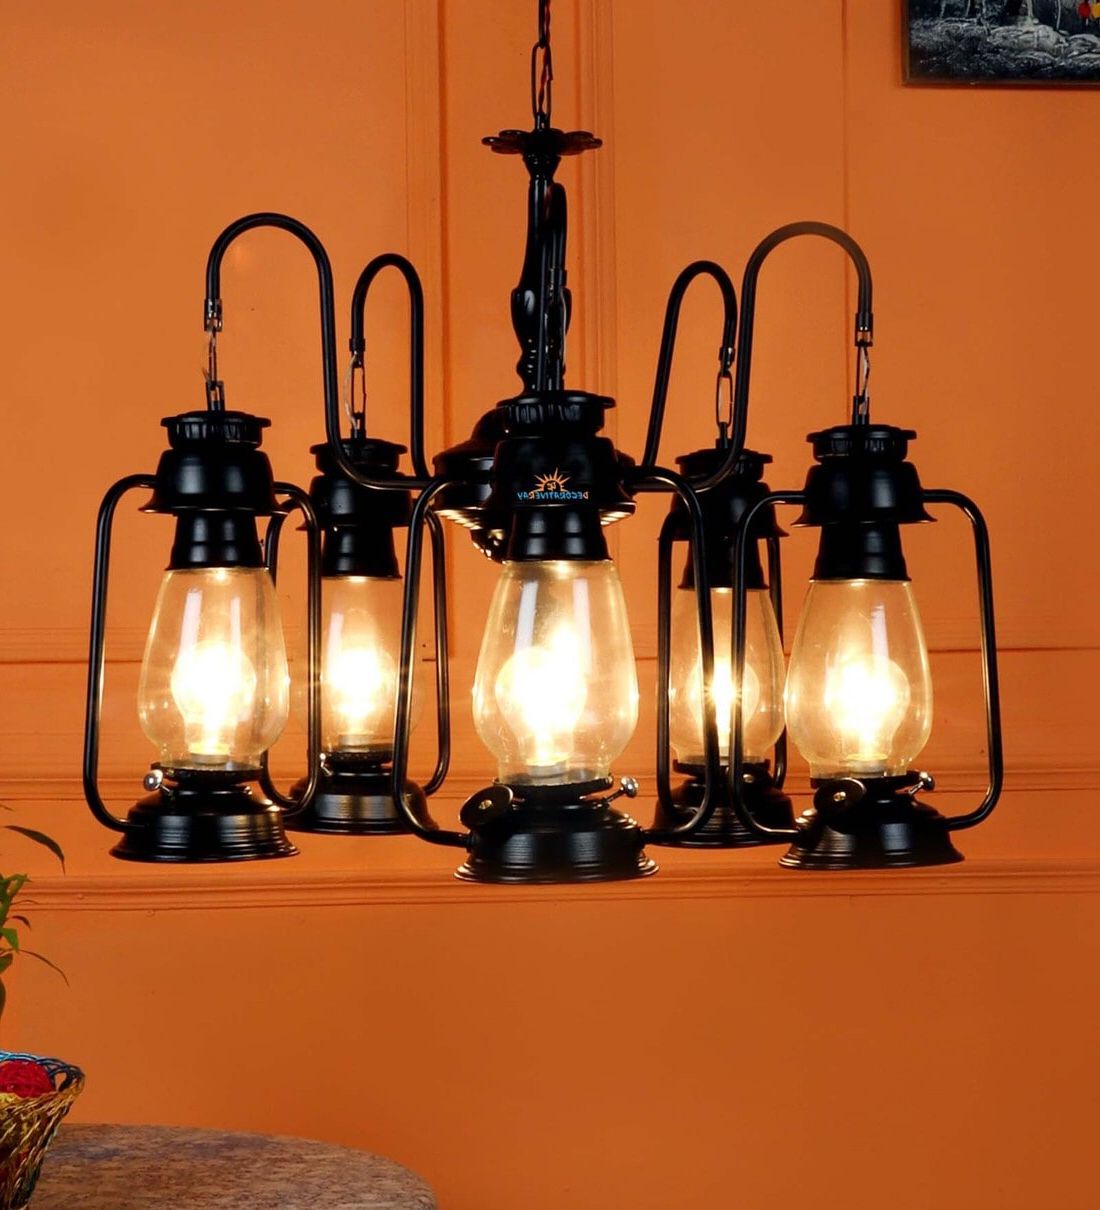 Recent Buy Black Lantern Chandelier In Clear Glassdecorativeray Online –  Shaded Chandeliers – Chandeliers – Lamps And Lighting – Pepperfry Product With Regard To Rustic Black Lantern Chandeliers (View 11 of 15)